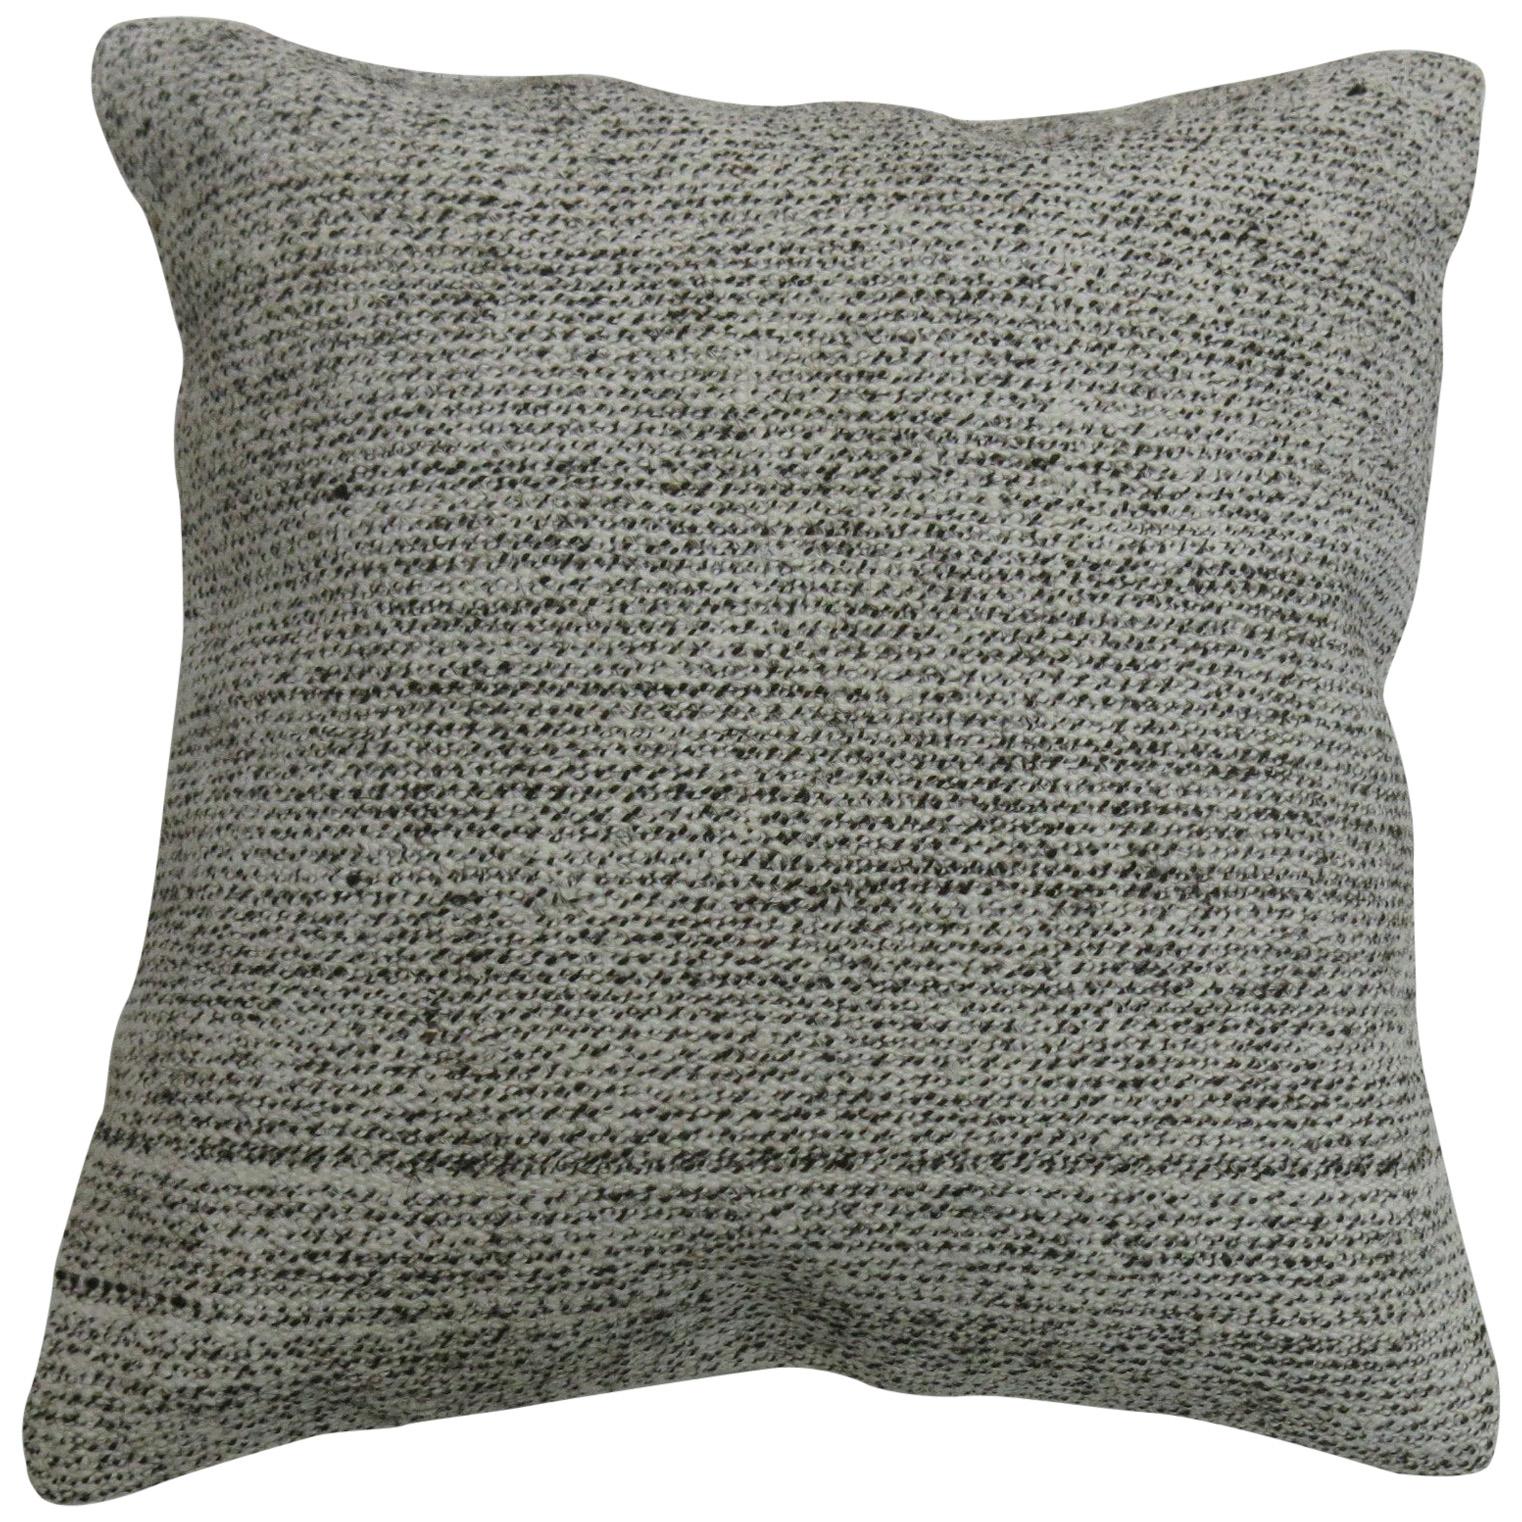 Gray Speckled Turkish Kilim Pillow For Sale